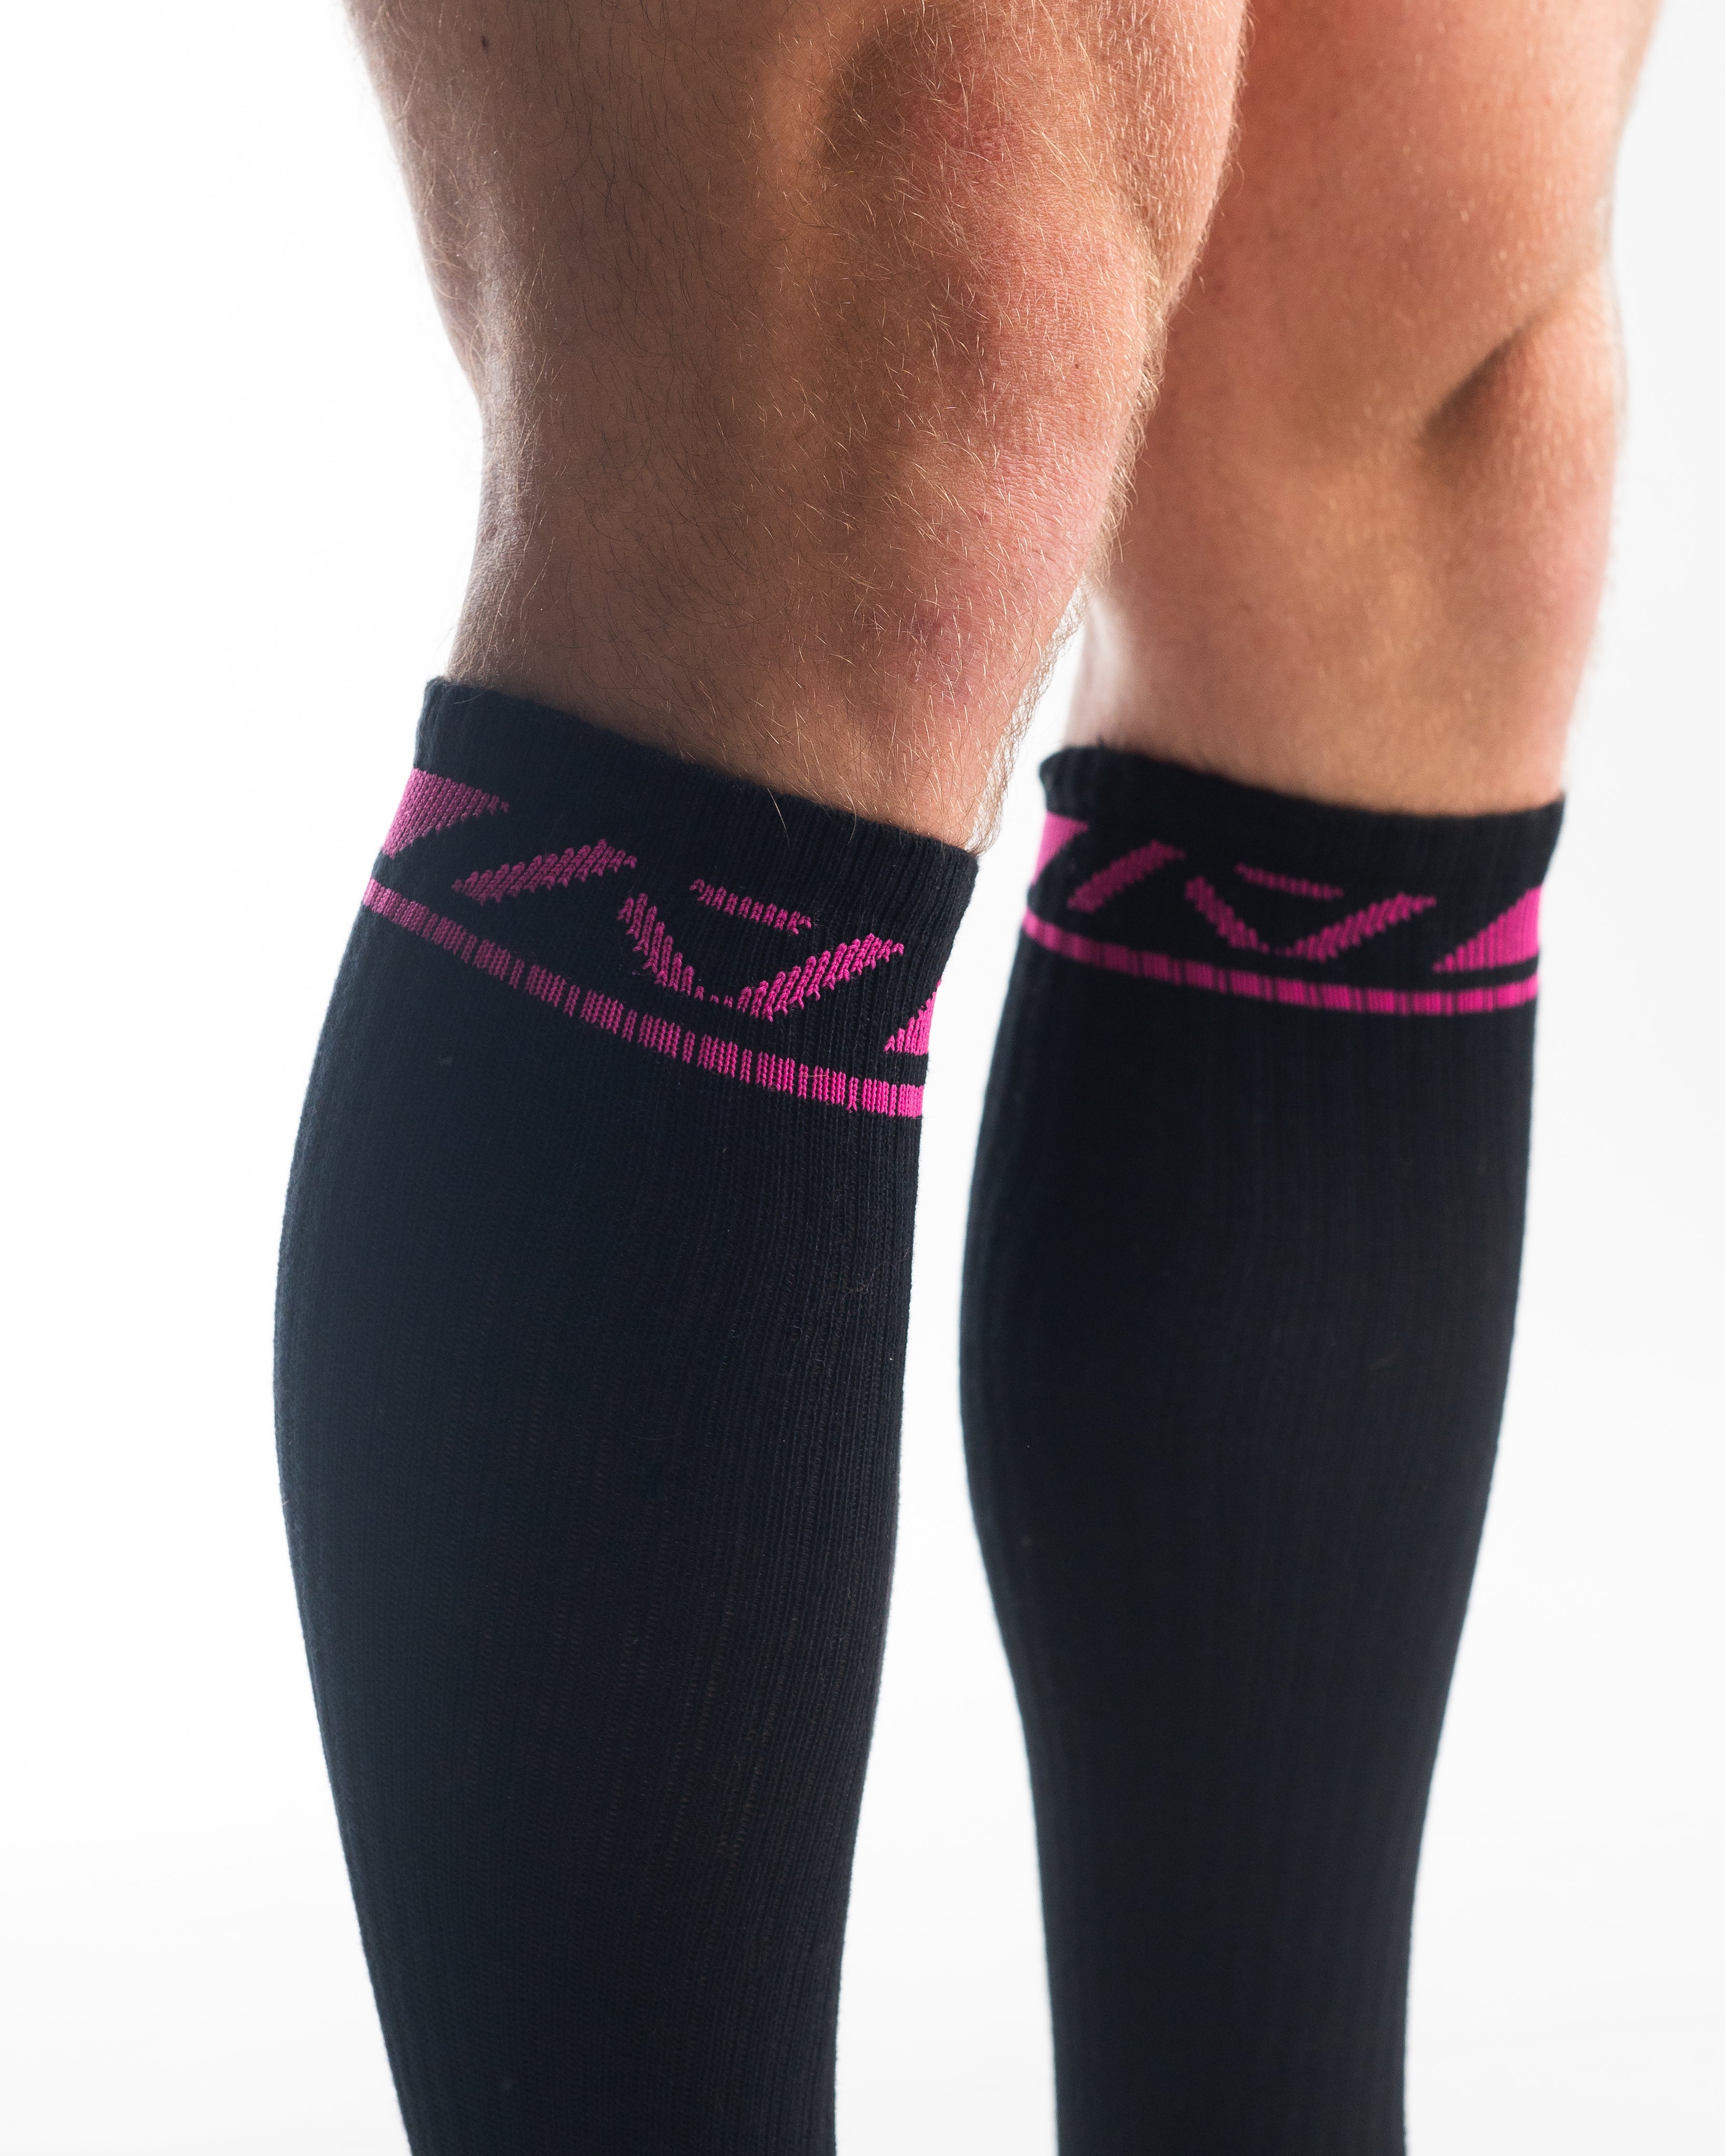 A7 Flamingo deadlift socks are designed specifically for pulls and keep your shins protected from scrapes. A7 deadlift socks are a perfect pair to wear in training or powerlifting competition. The A7 IPF Approved Kit includes Powerlifting Singlet, A7 Meet Shirt, A7 Zebra Wrist Wraps, A7 Deadlift Socks, Hourglass Knee Sleeves (Stiff Knee Sleeves and Rigor Mortis Knee Sleeves). All A7 Powerlifting Equipment shipping to UK, Norway, Switzerland and Iceland.